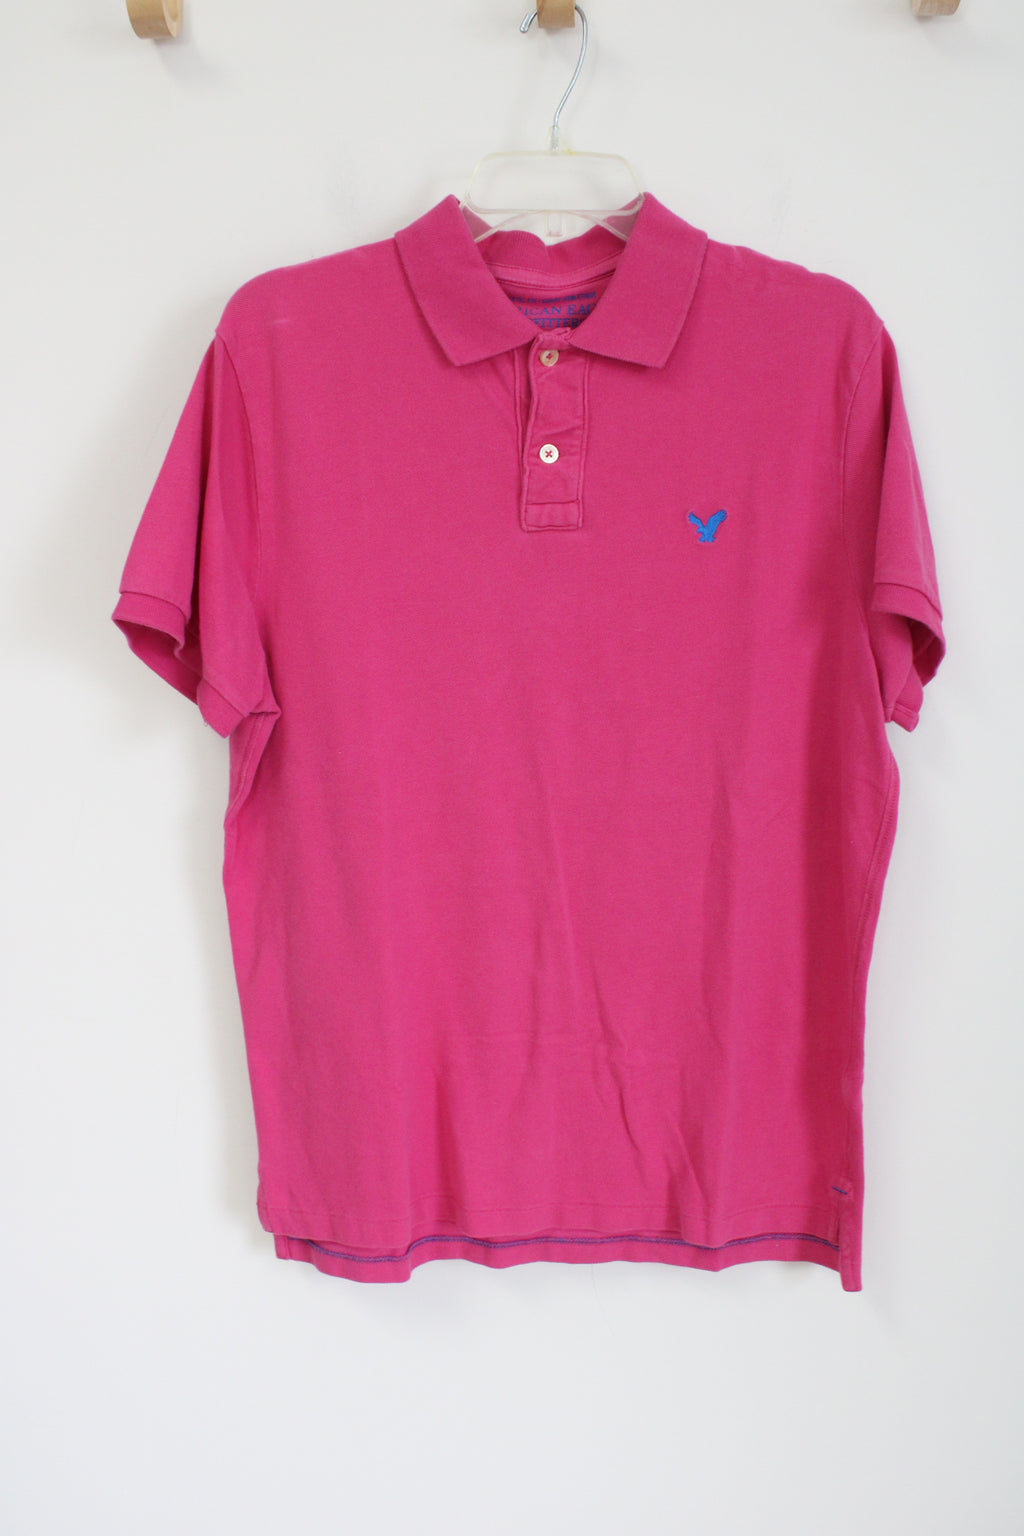 American Eagle Athletic Fit Pink Polo Shirt | L